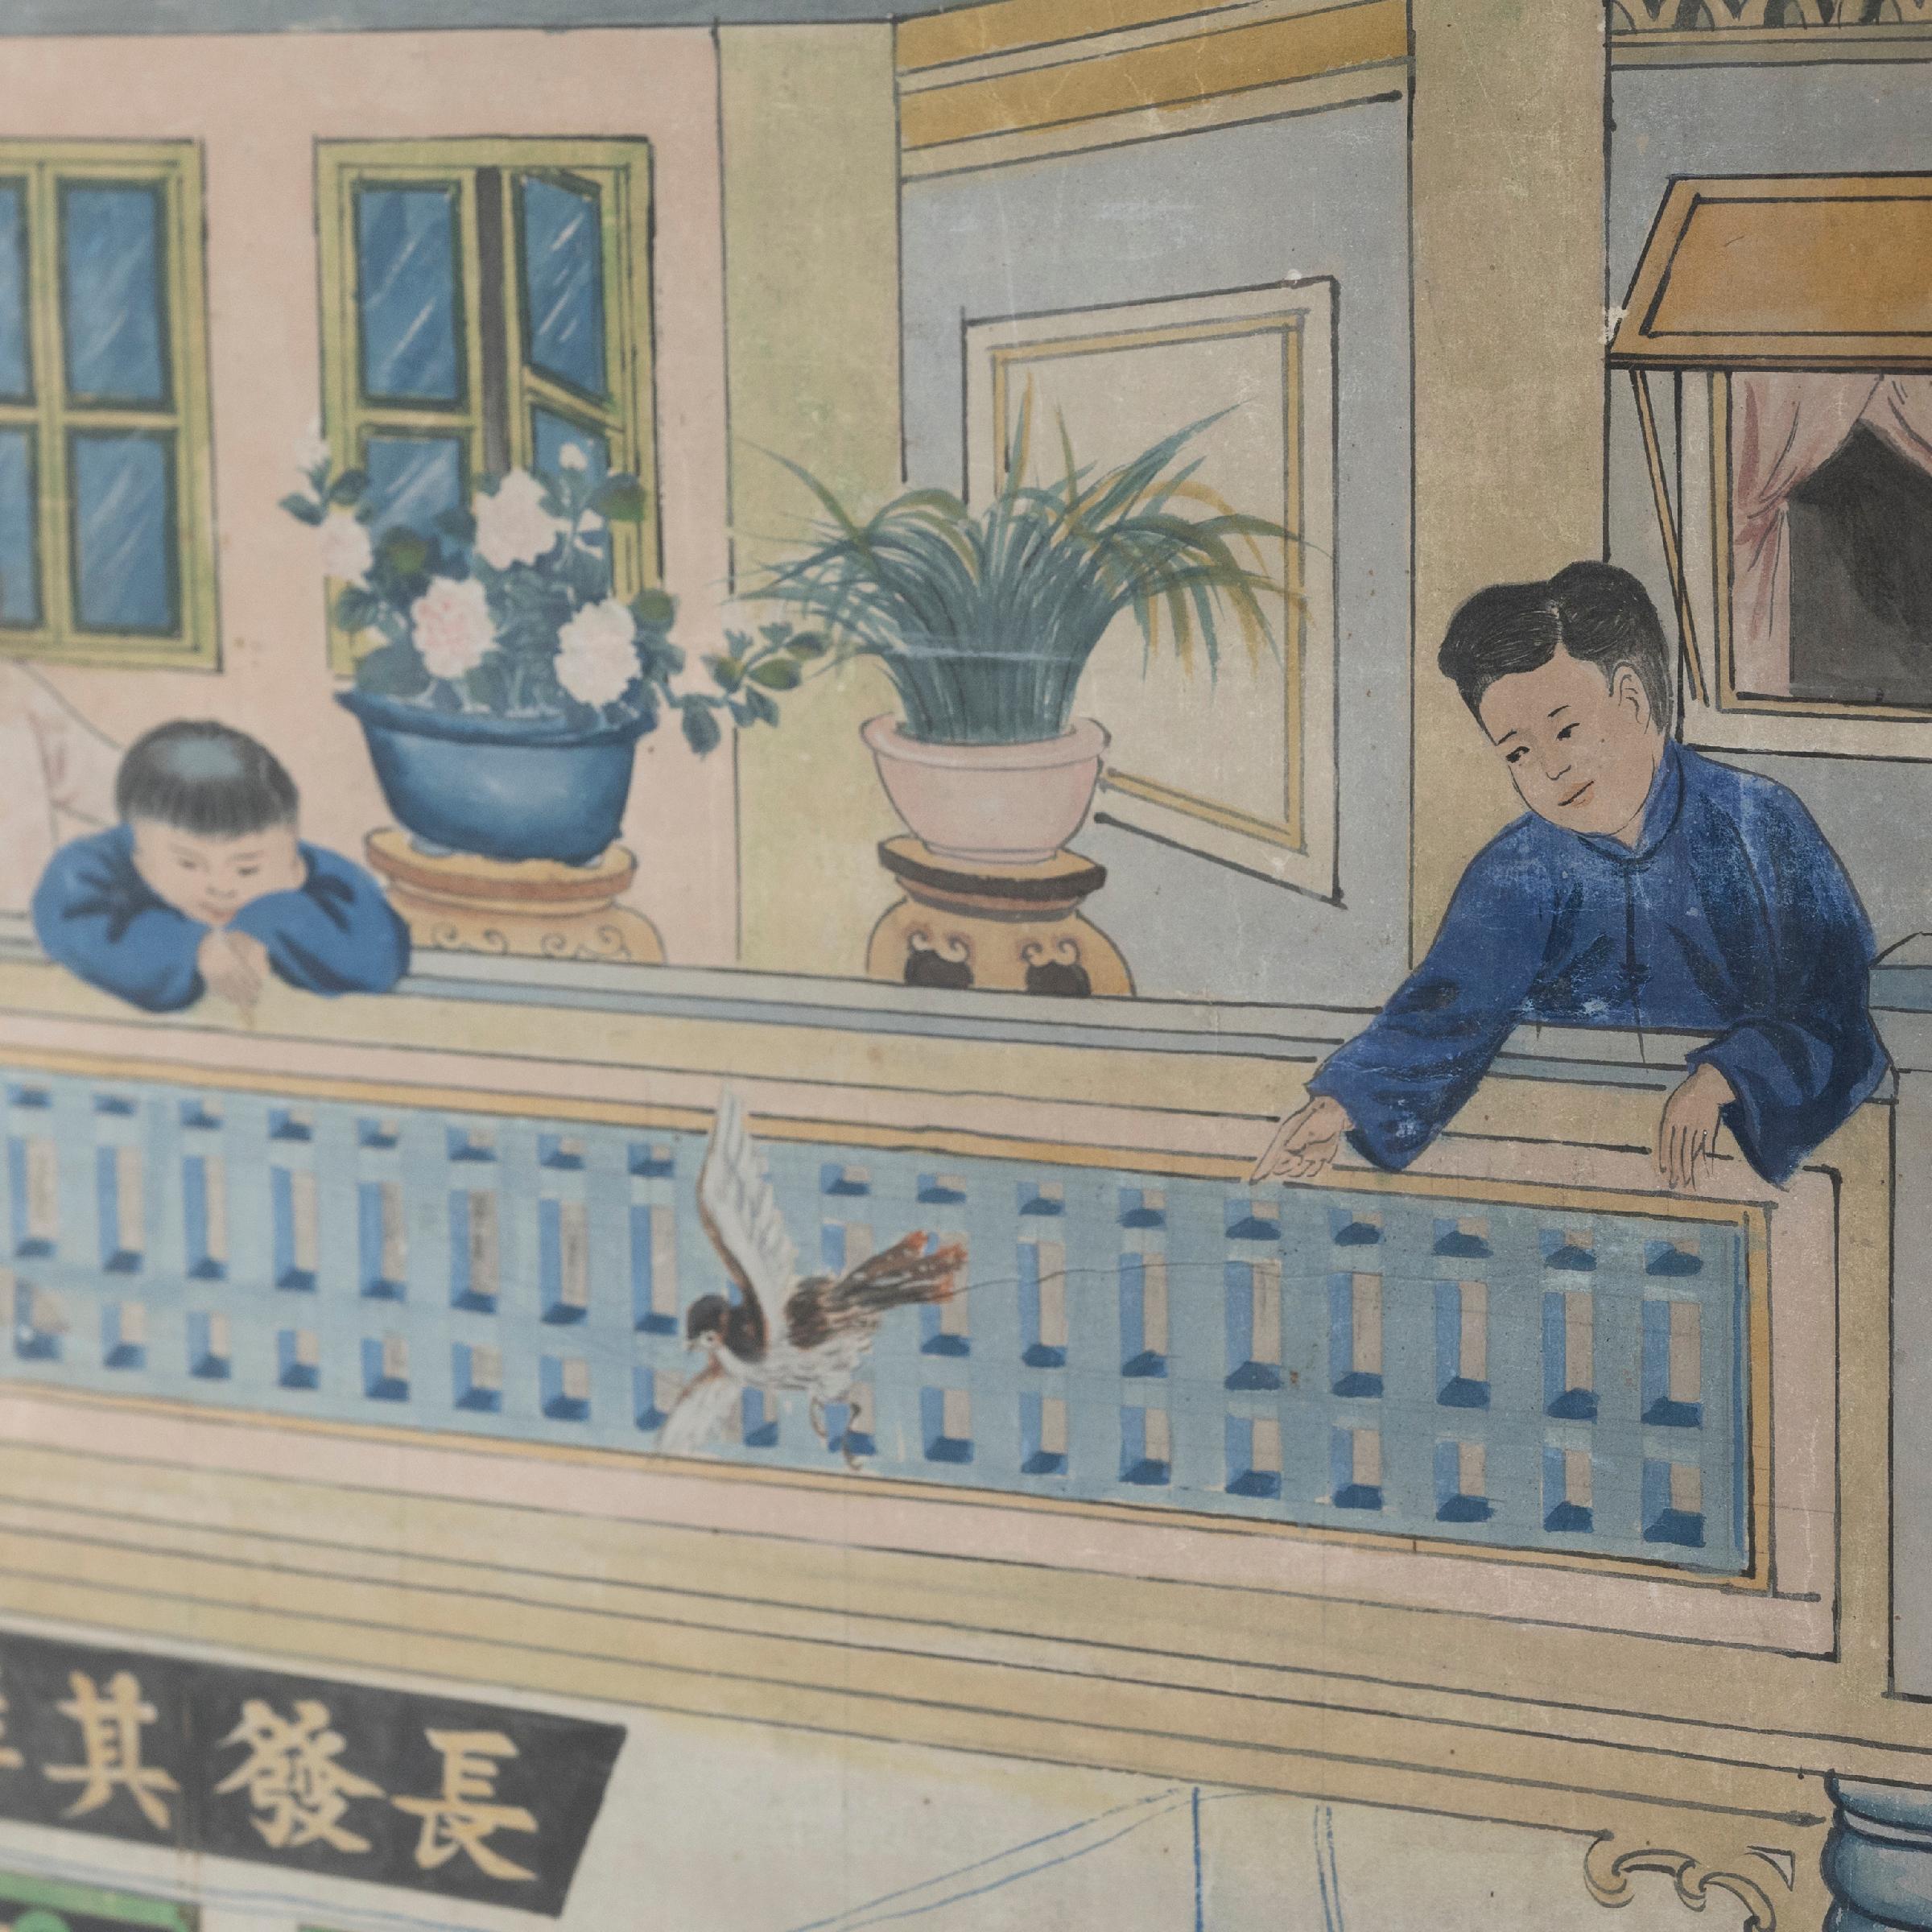 This intricately detailed composition is a late-Qing dynasty ancestor portrait depicting several generations of a family's ancestry. This painting would have been displayed in the home as the object of familial ancestor worship. When properly cared